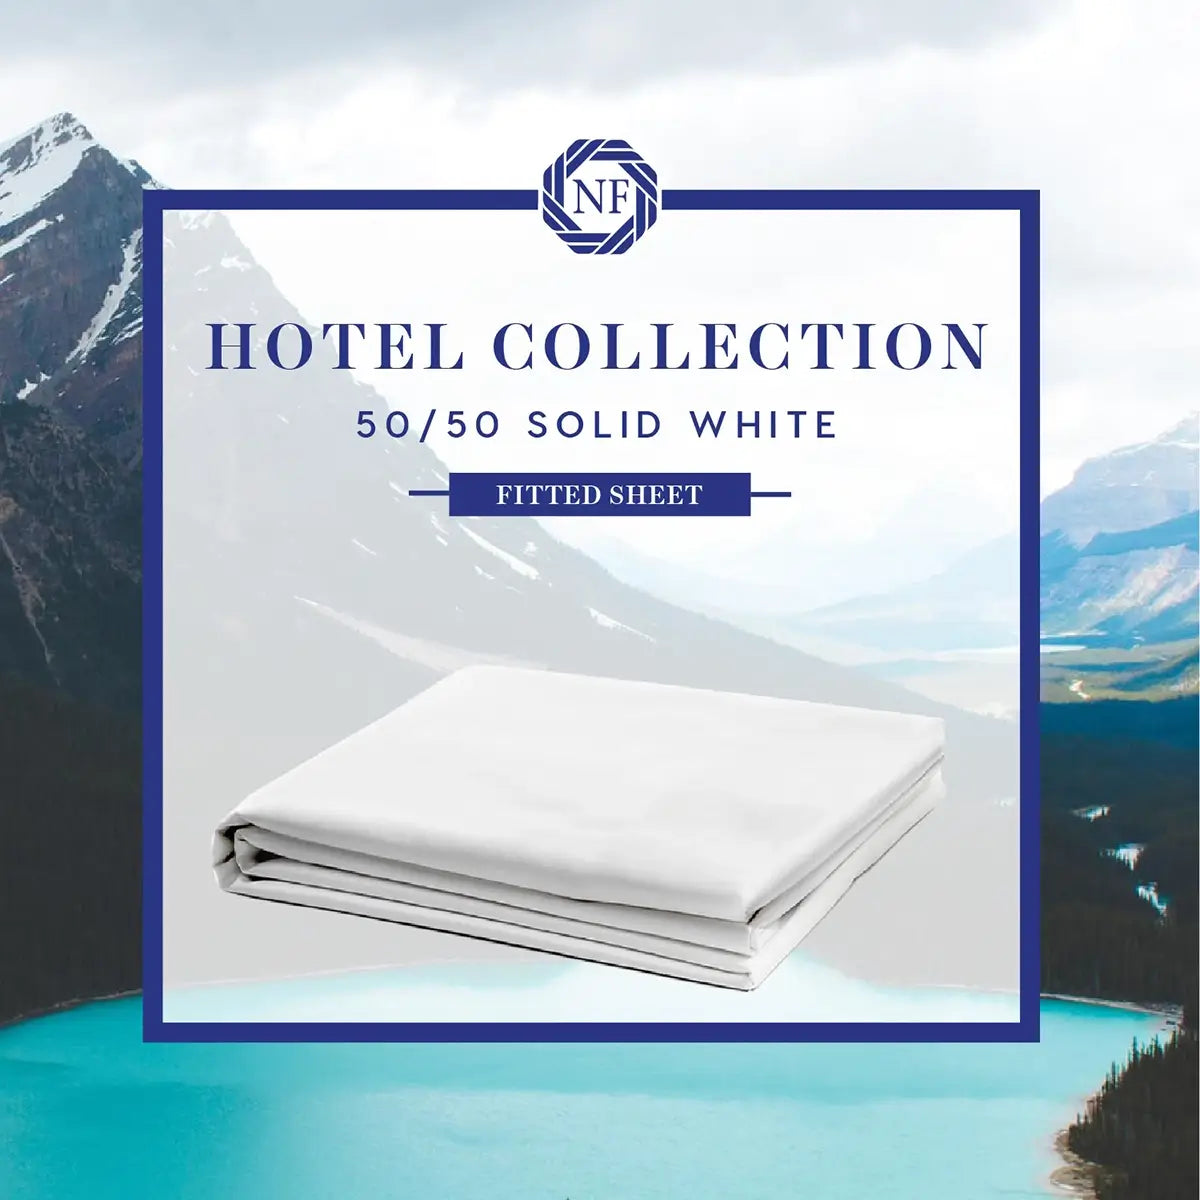 Hotel Collection - 50/50 Solid White Linen Fitted Sheet - Northern Feather Canada eStore